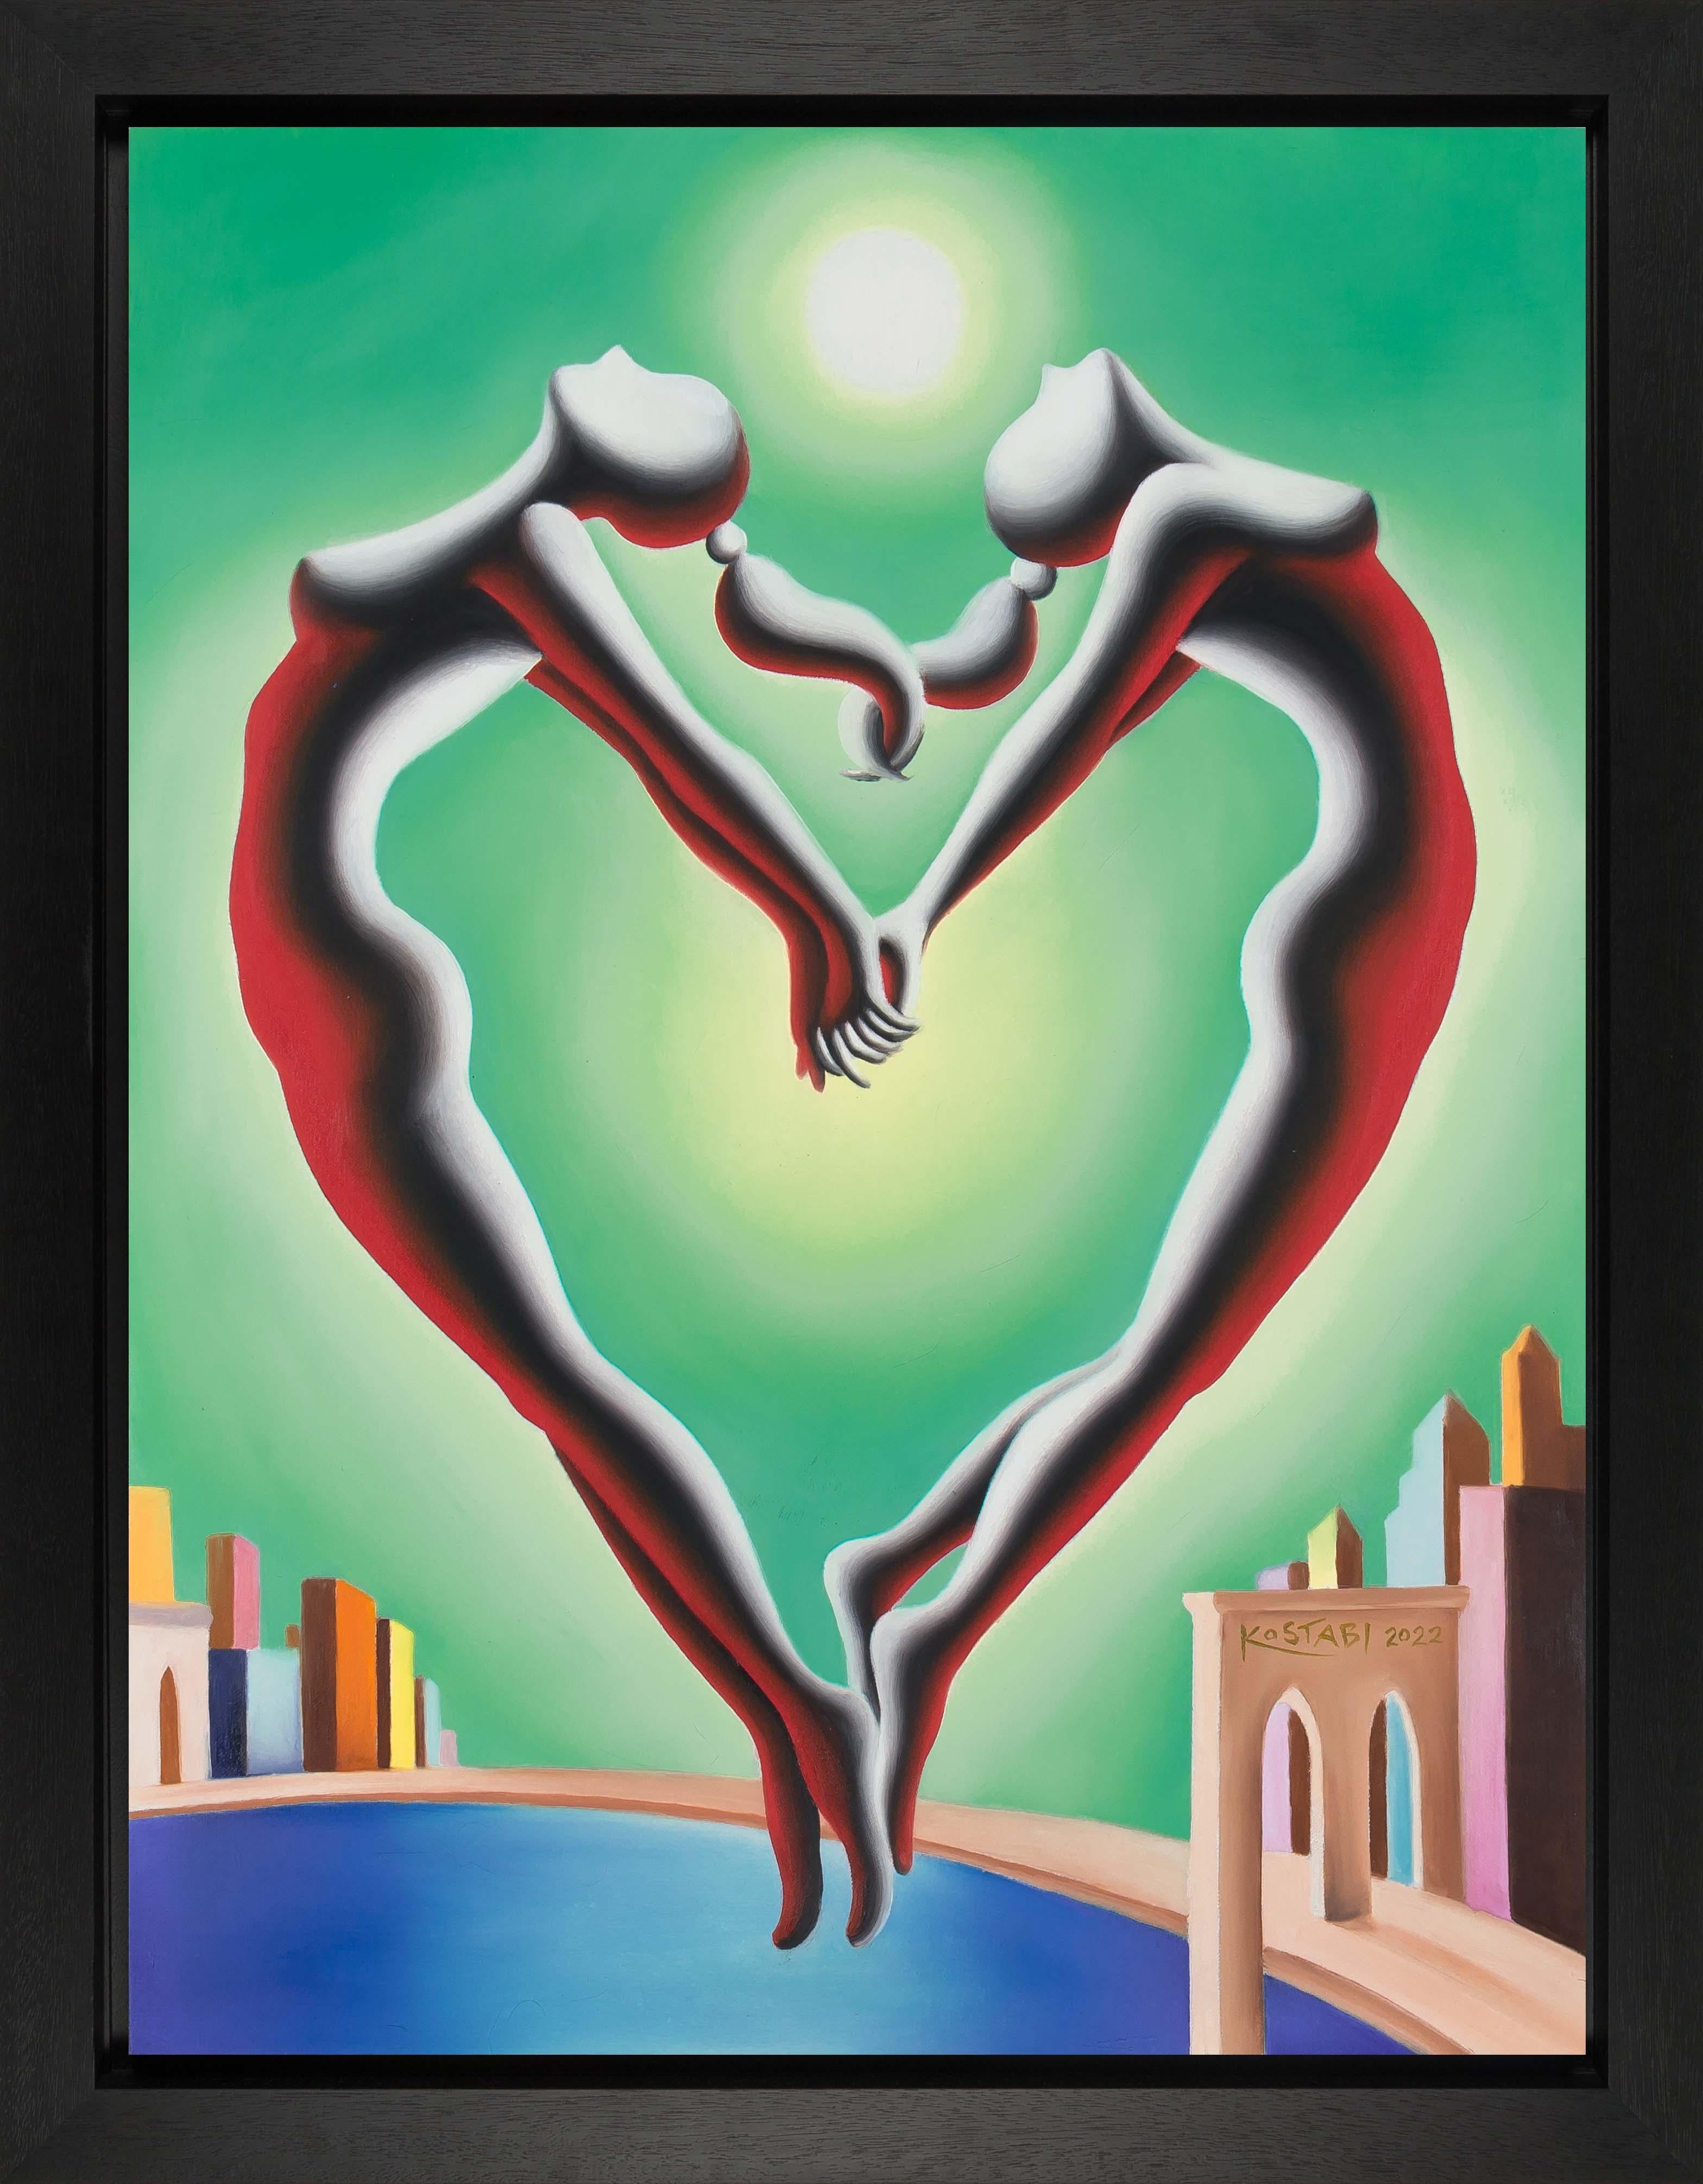 Together We Soar, 2022 - Painting by Mark Kostabi